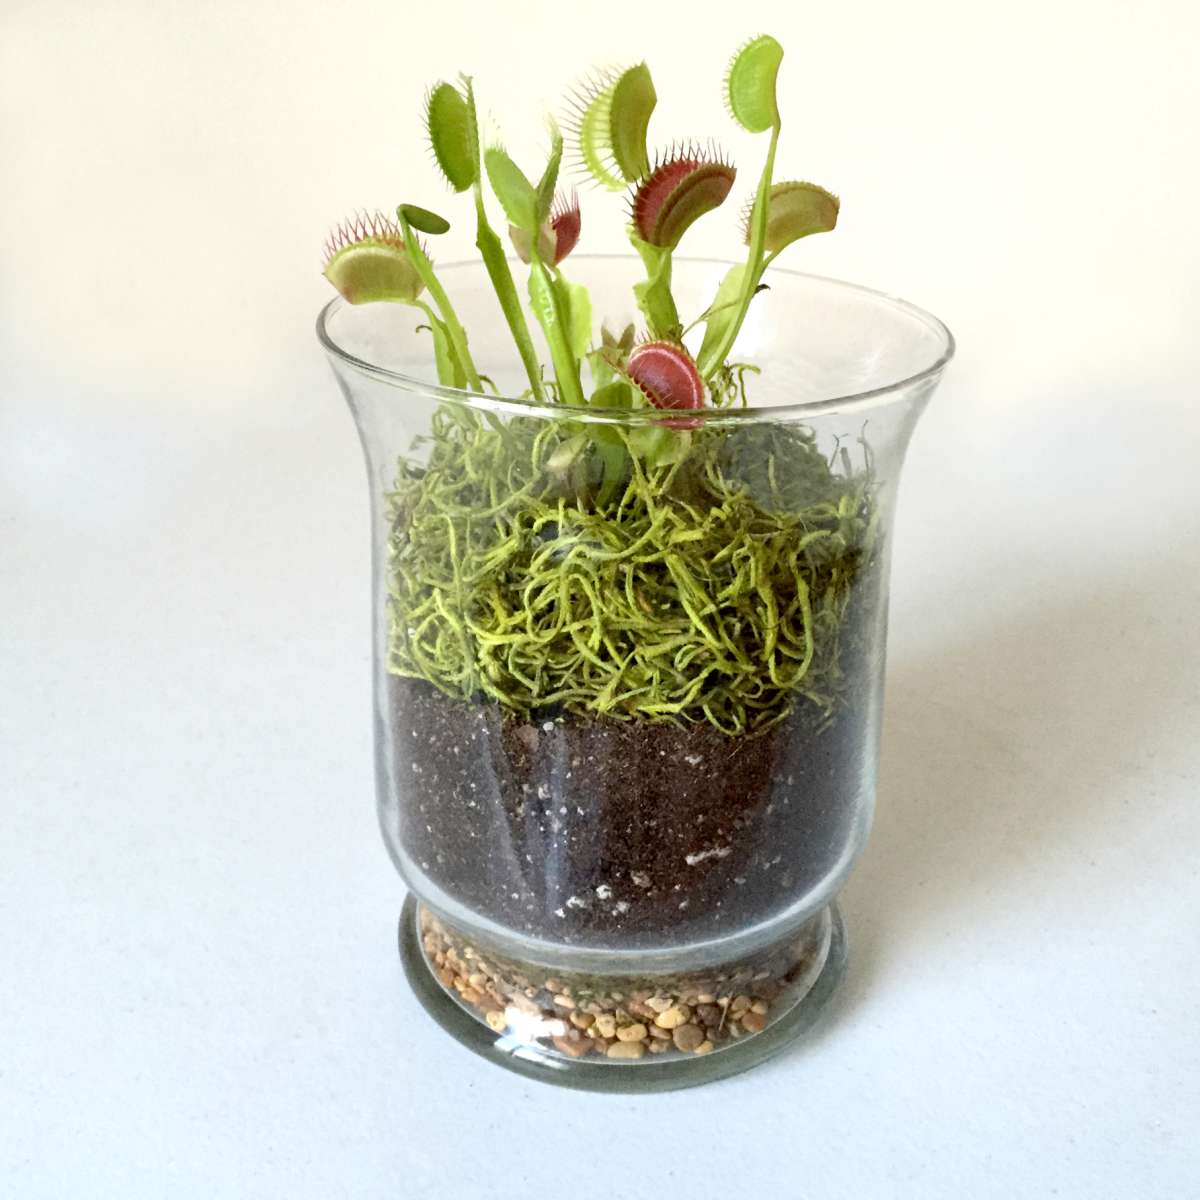 How to grow and care for Venus Flytrap (Dionaea muscipula) carnivorous plants in terrariums